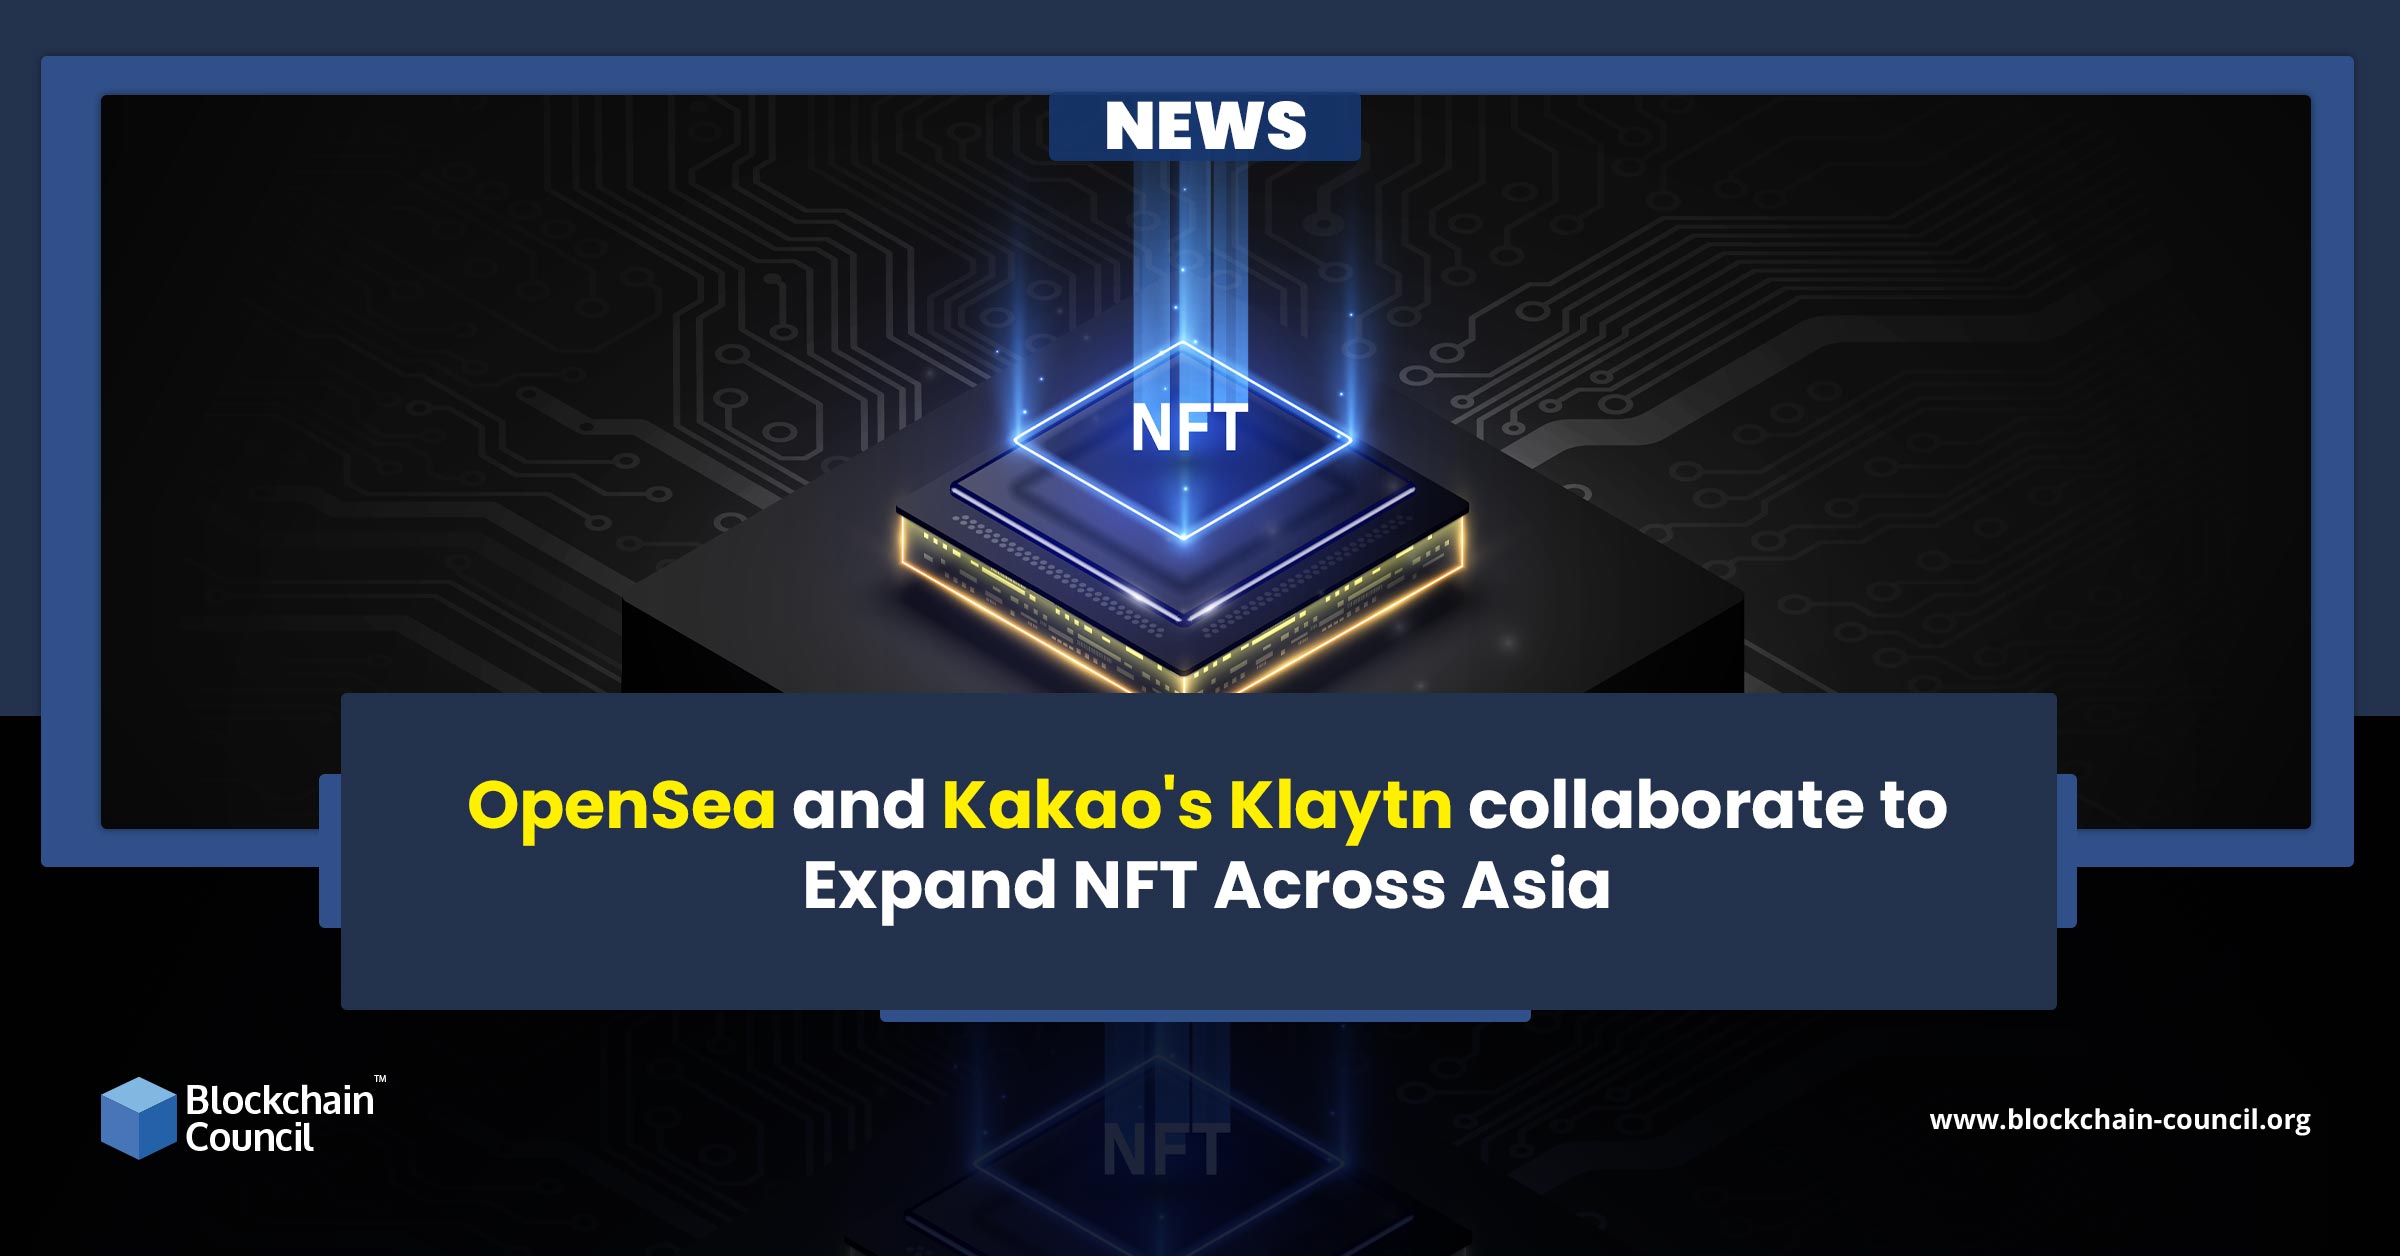 OpenSea and Kakao's Klaytn collaborate to Expand NFT Across Asia